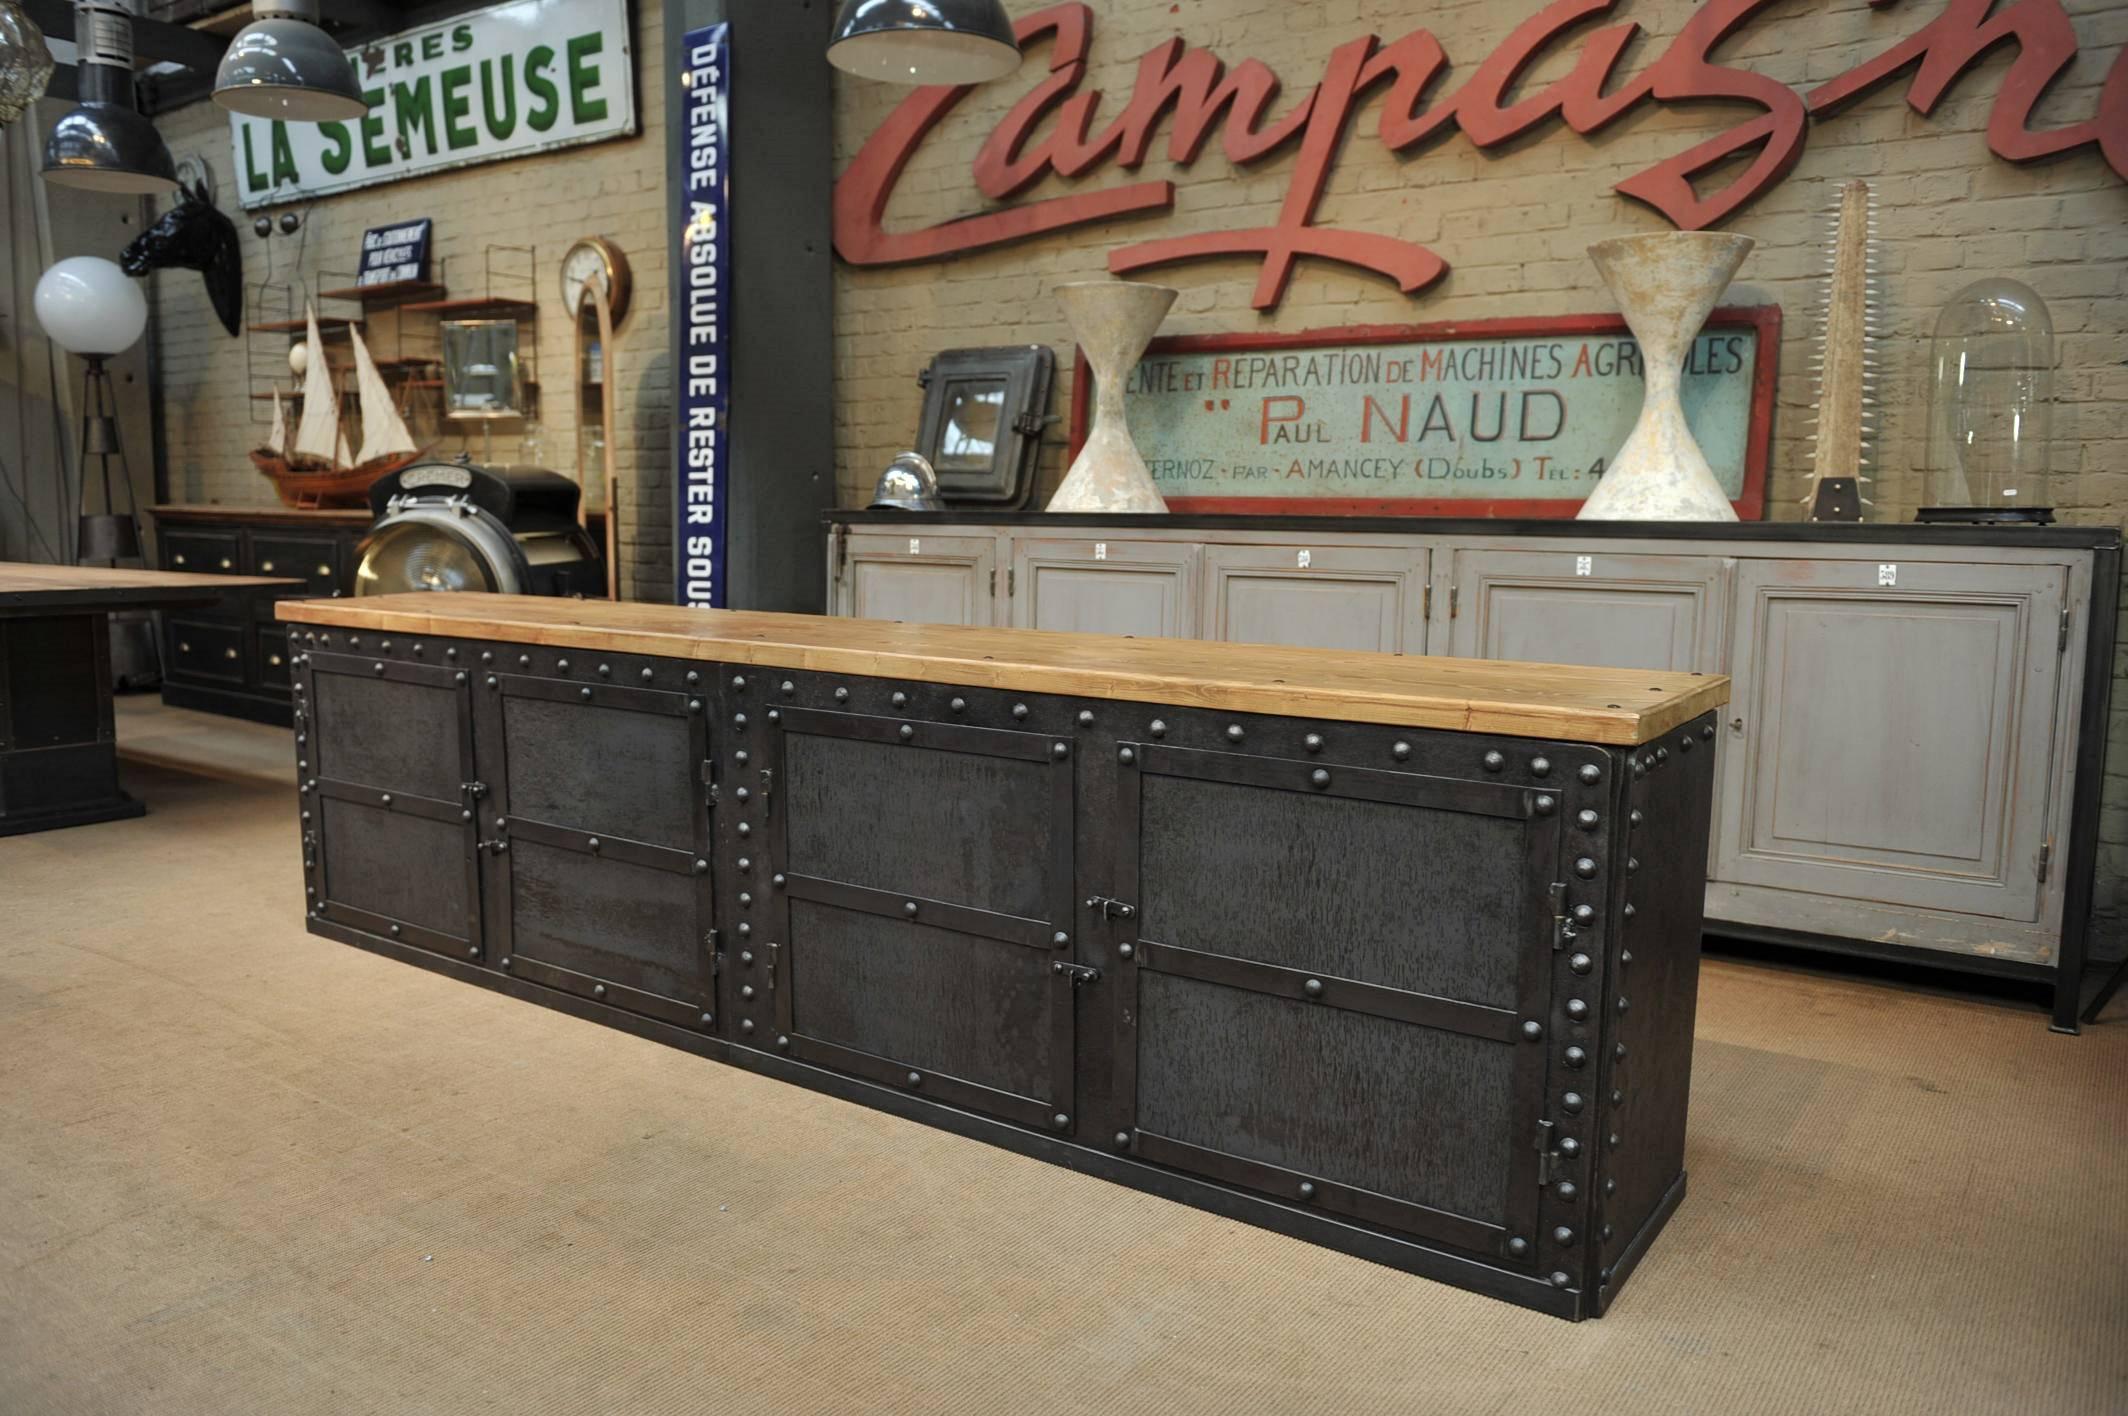 1900 riveted iron French factory trunk opened in four doors long credenza cabinet with solid oak inside shelves and pine top.

 